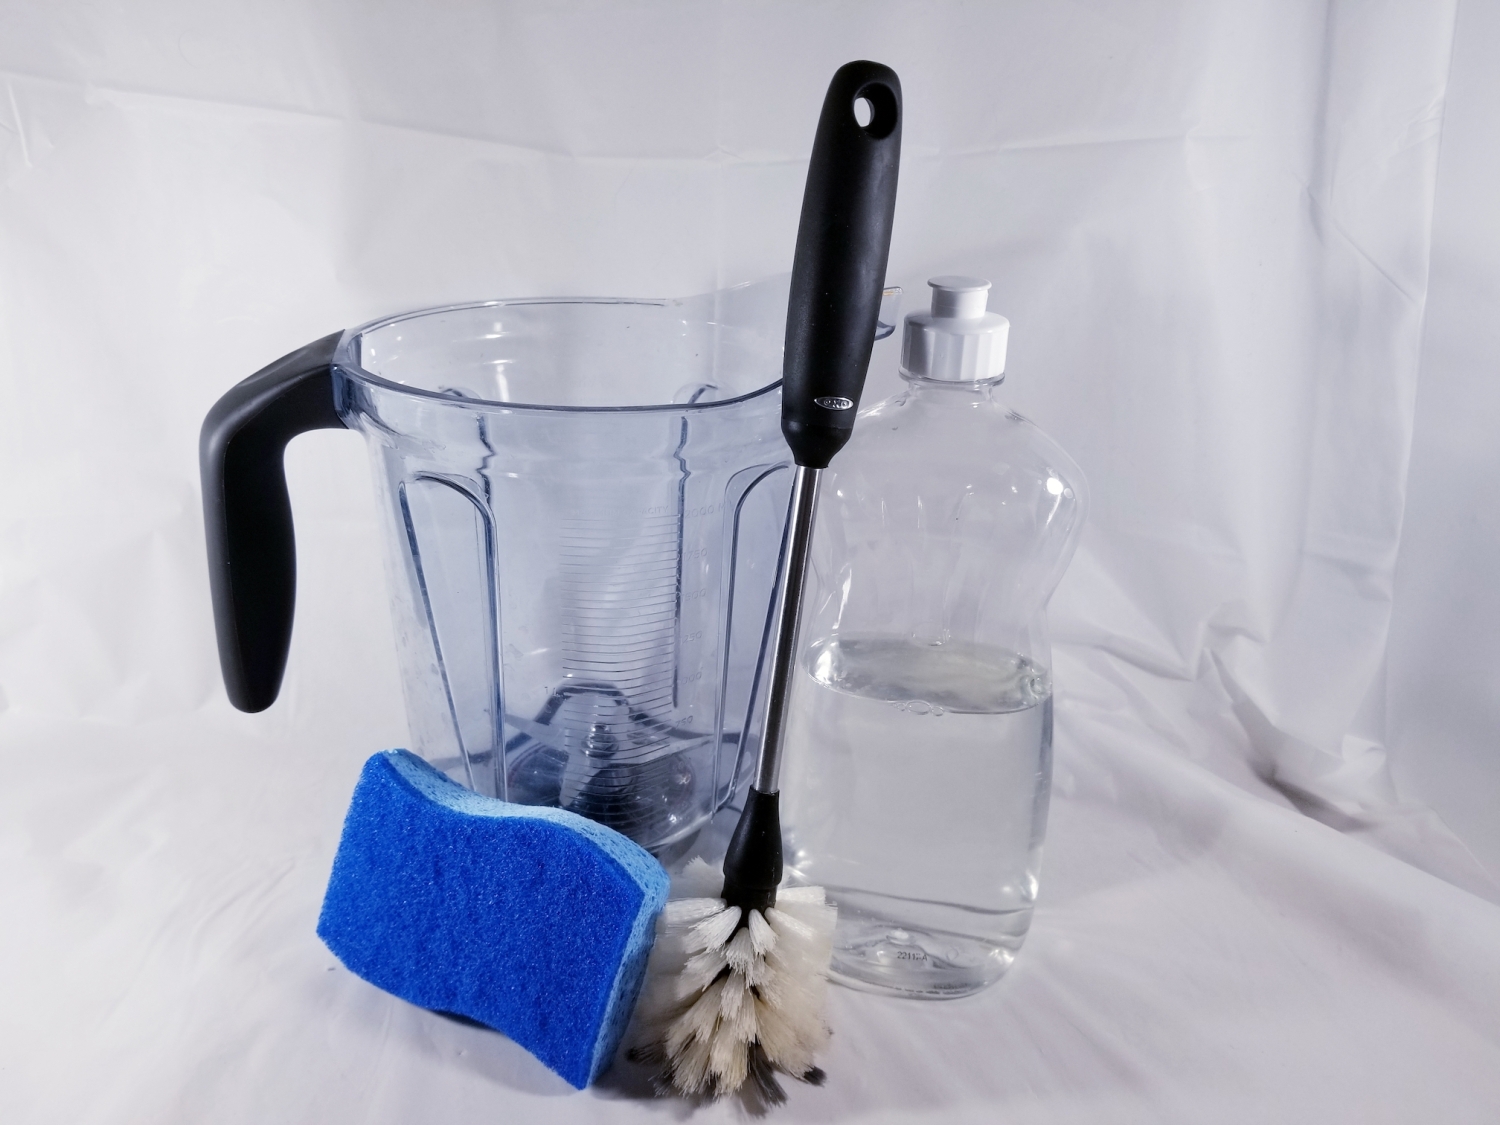 The blender container, a bottle of soap, a sponge, and a scrub brush